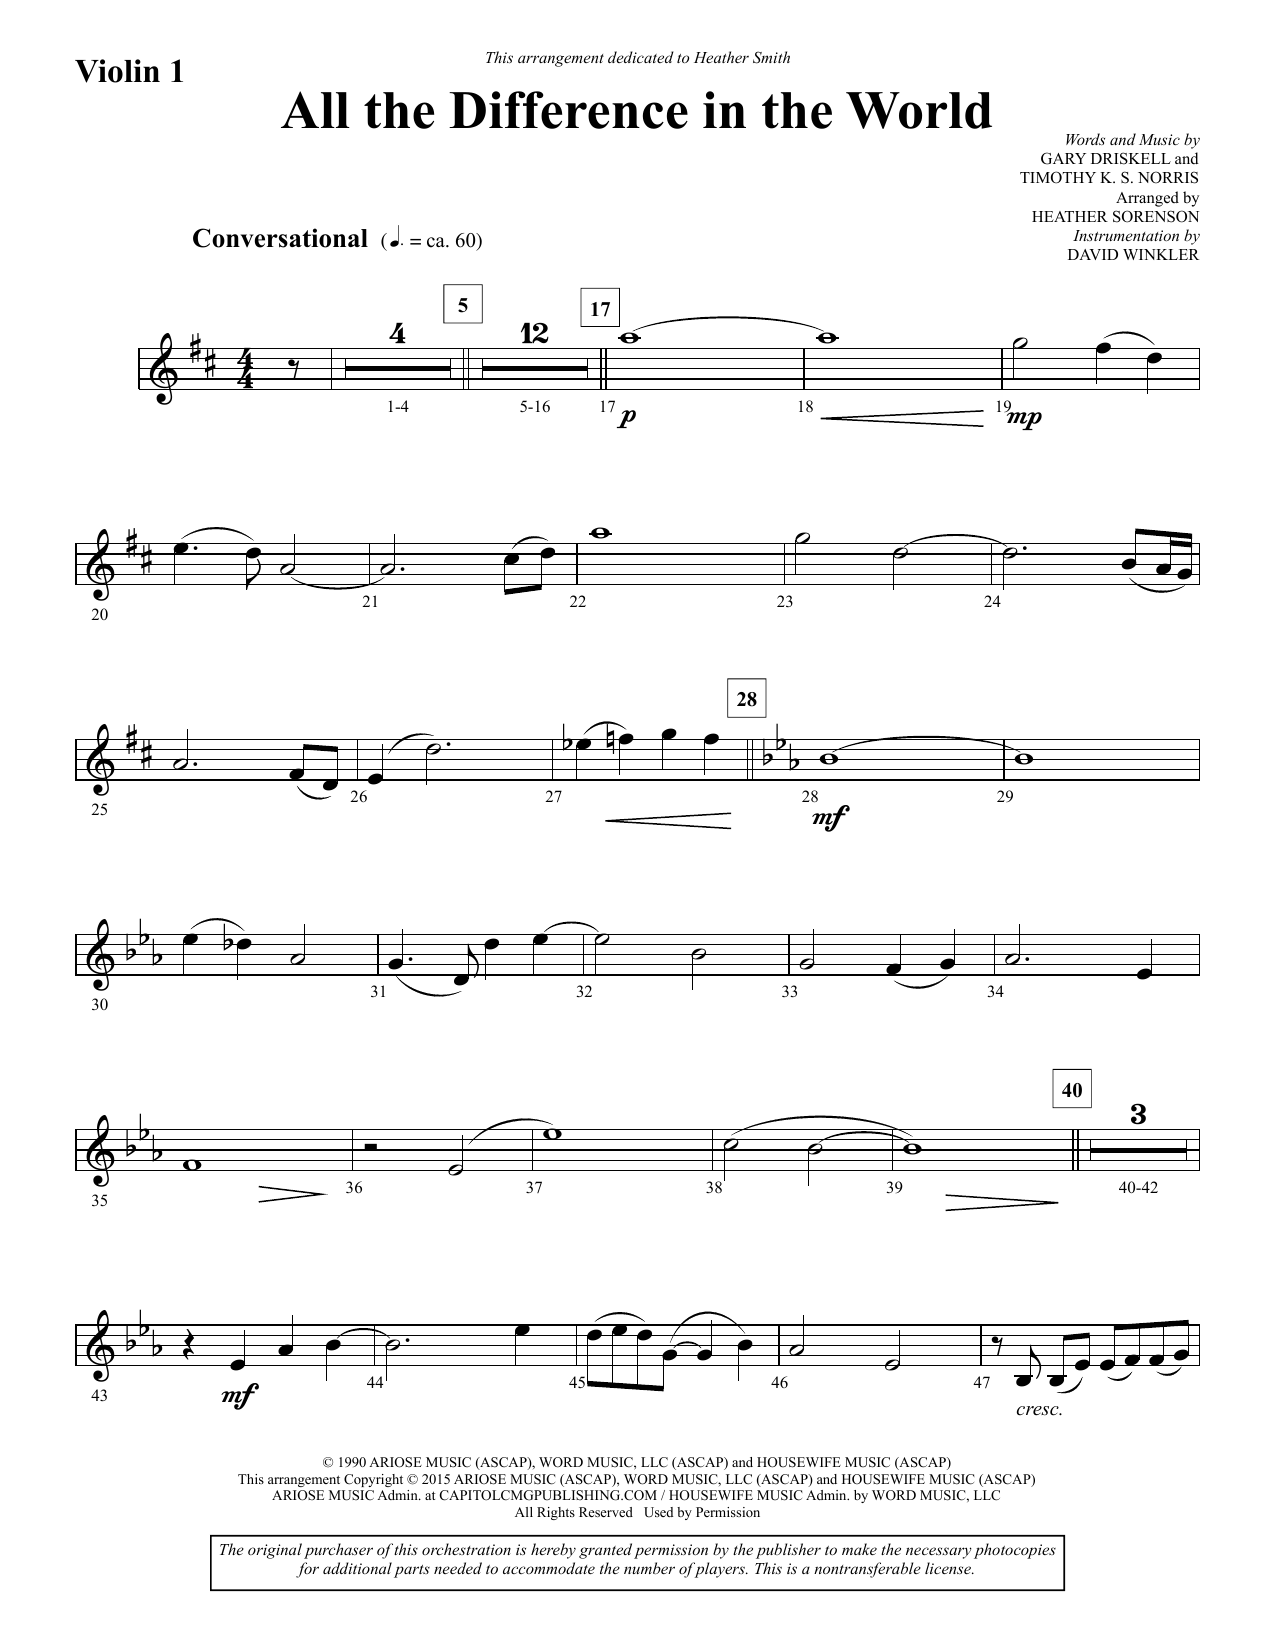 Heather Sorenson All the Difference in the World - Violin 1 sheet music notes and chords. Download Printable PDF.